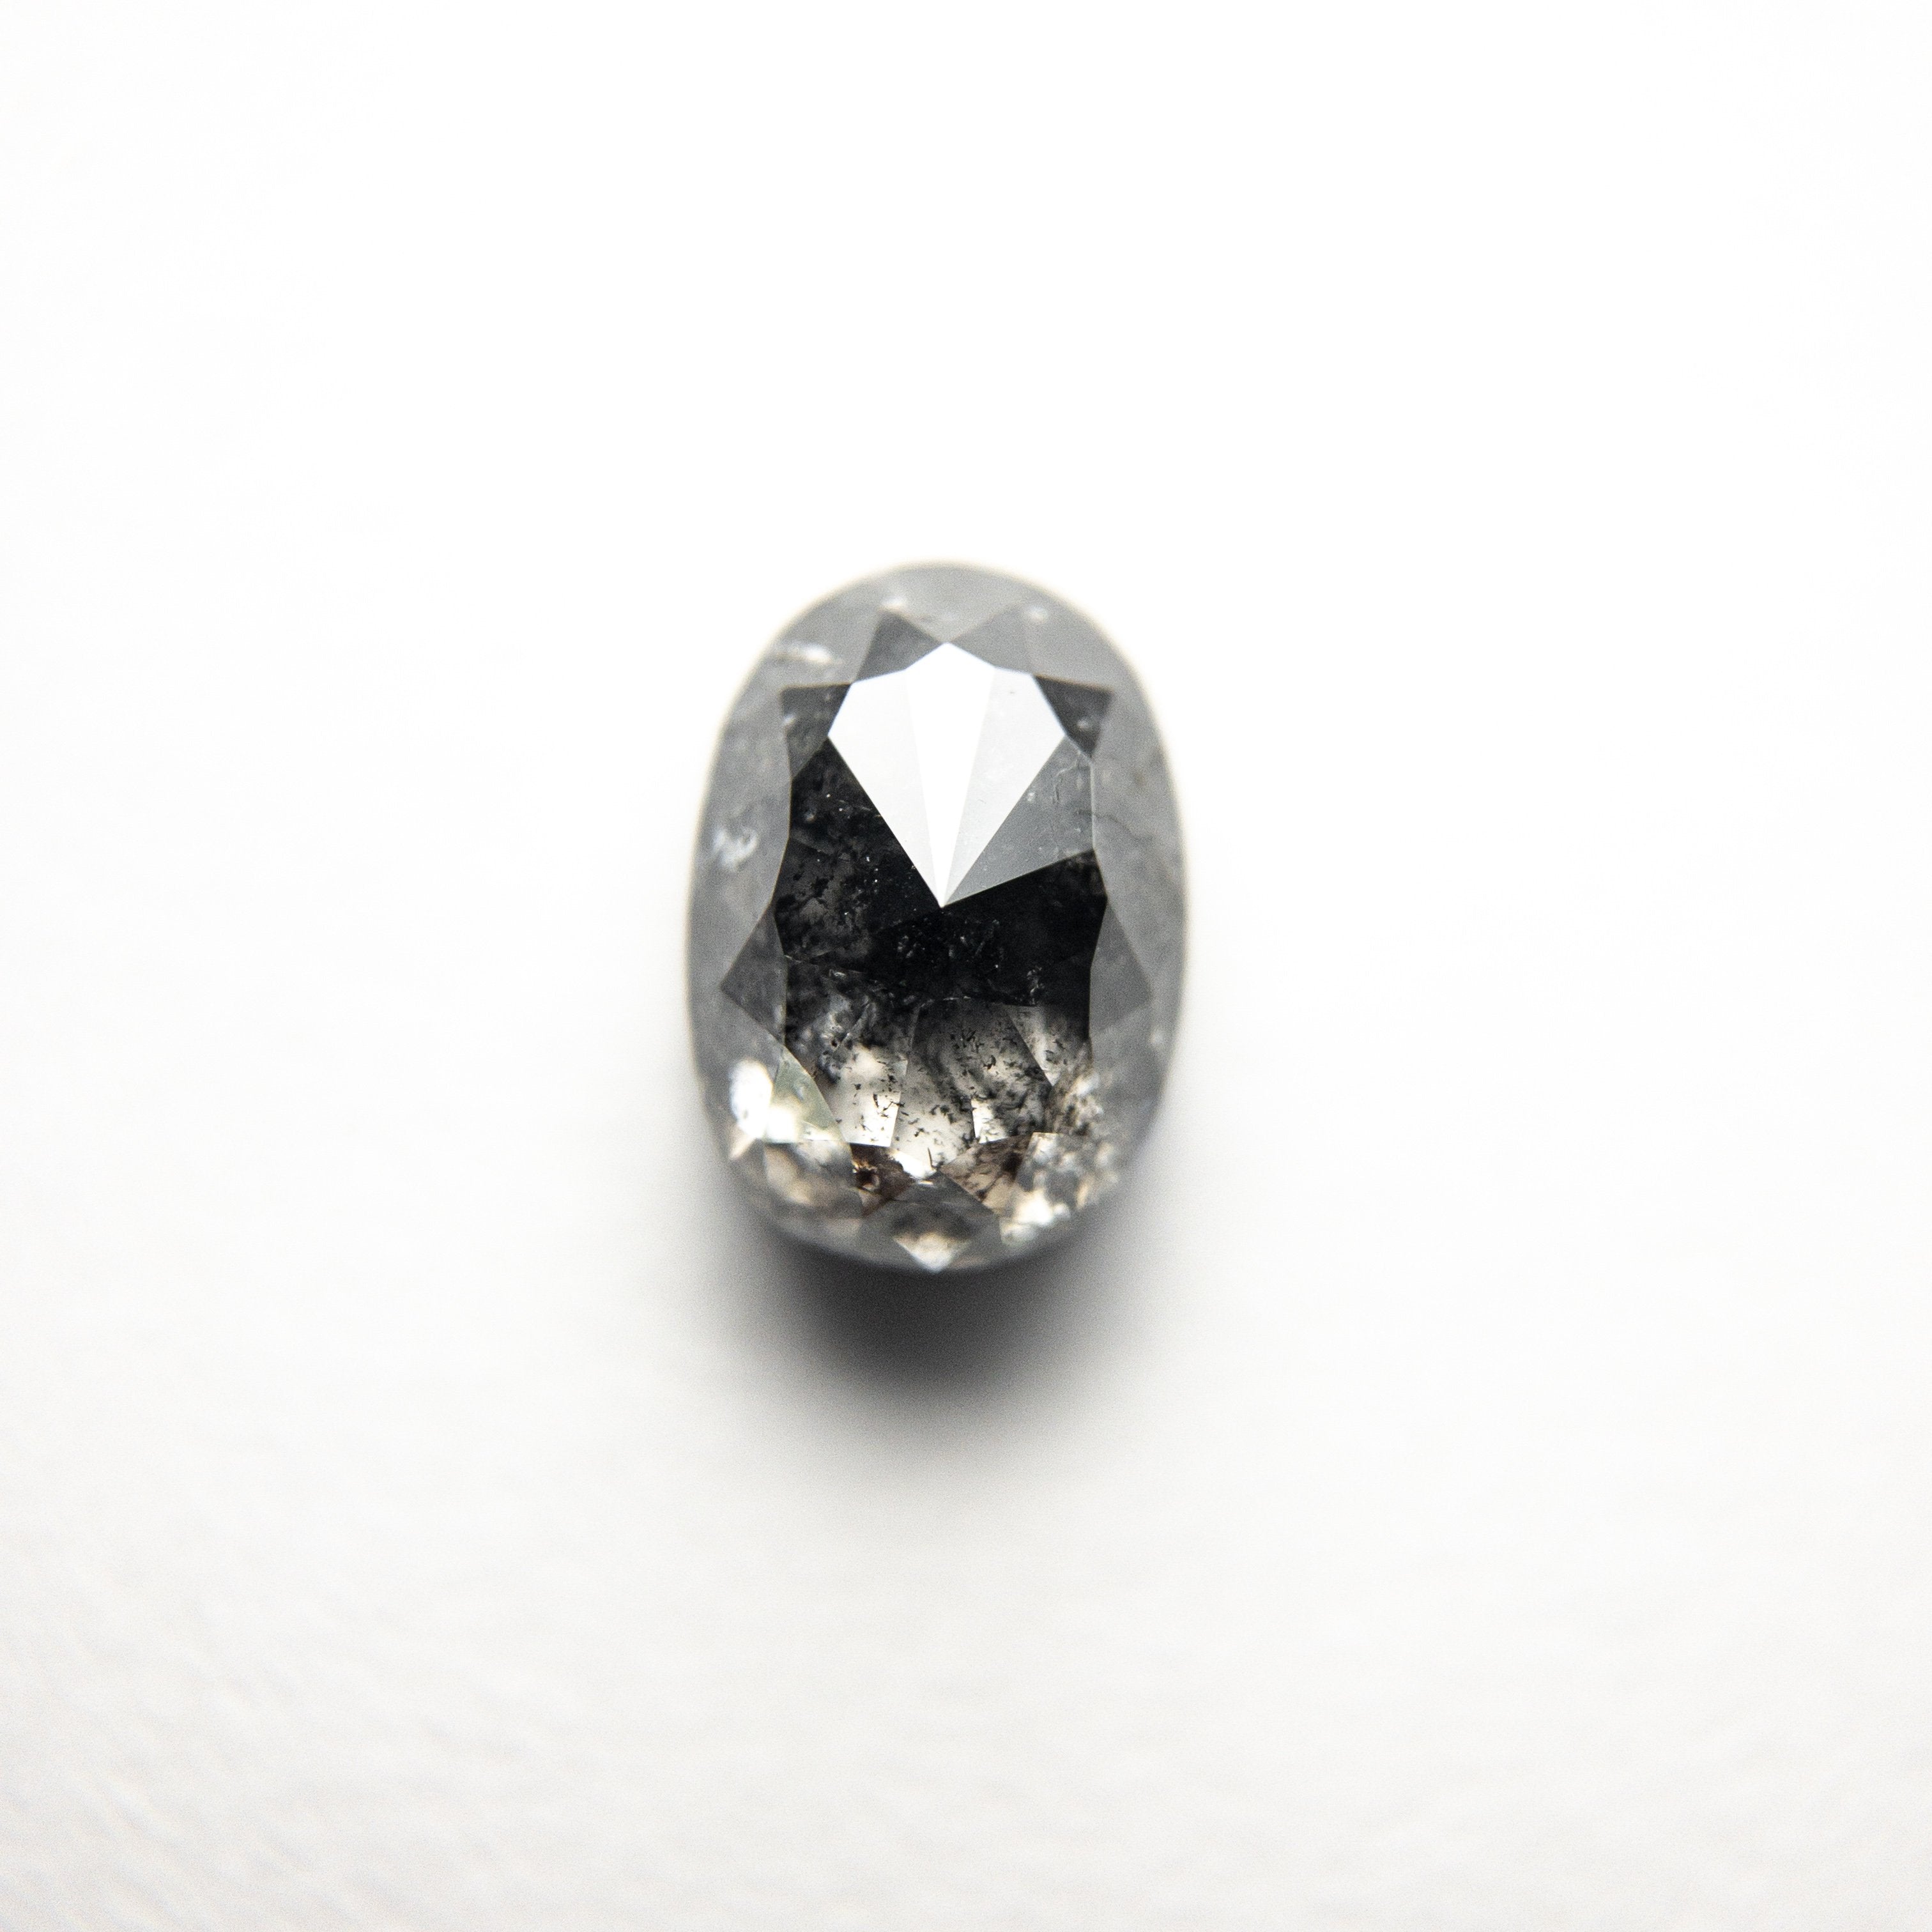 1.32ct 7.08x5.13x3.74mm Oval Double Cut 18435-09 hold D1947